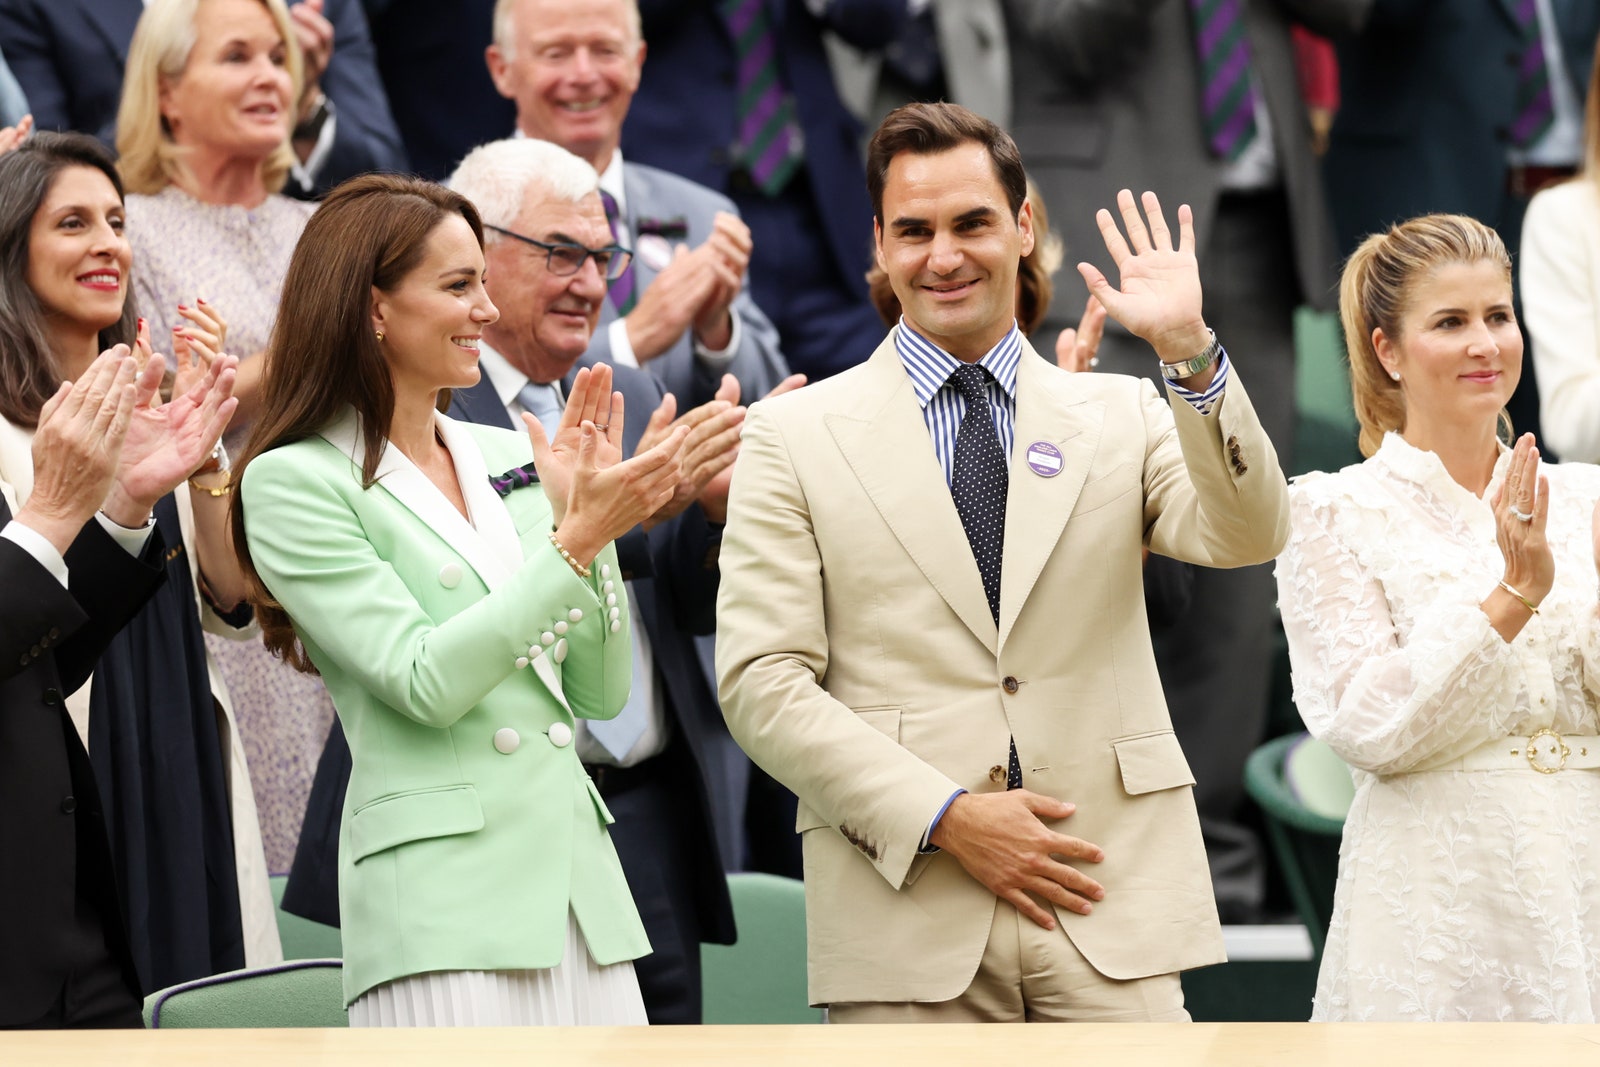 The Princess of Wales with Roger Federer.